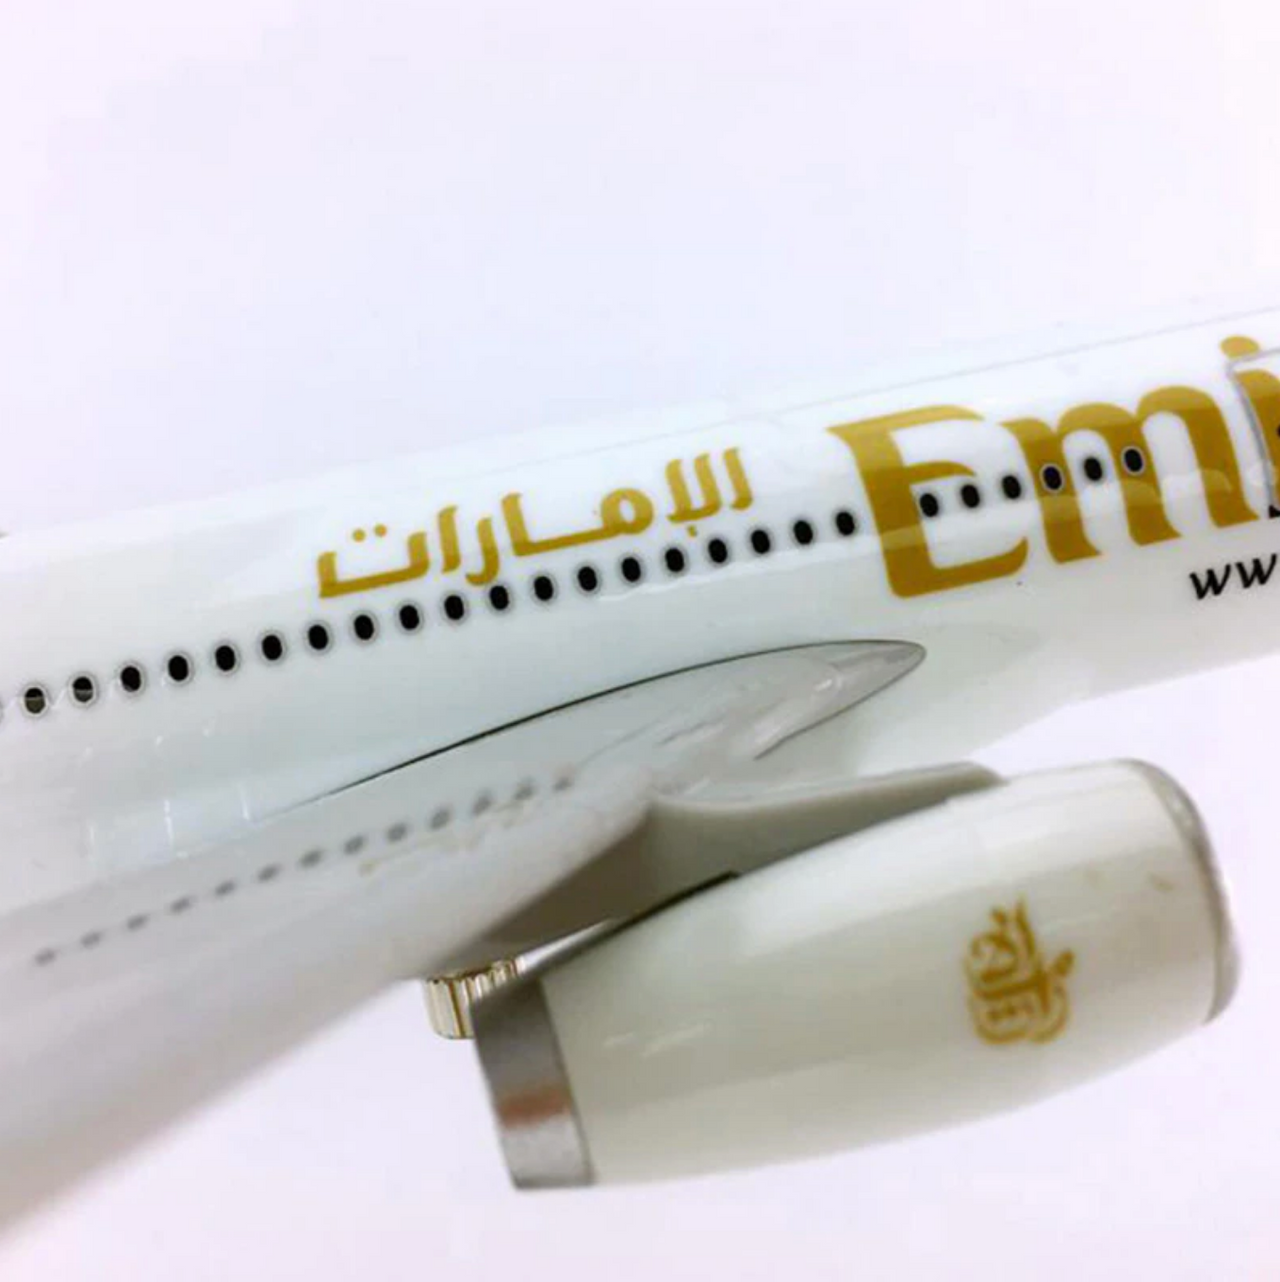 Emirates Airbus A330-200 (Special Edition 30CM) Airplane Model